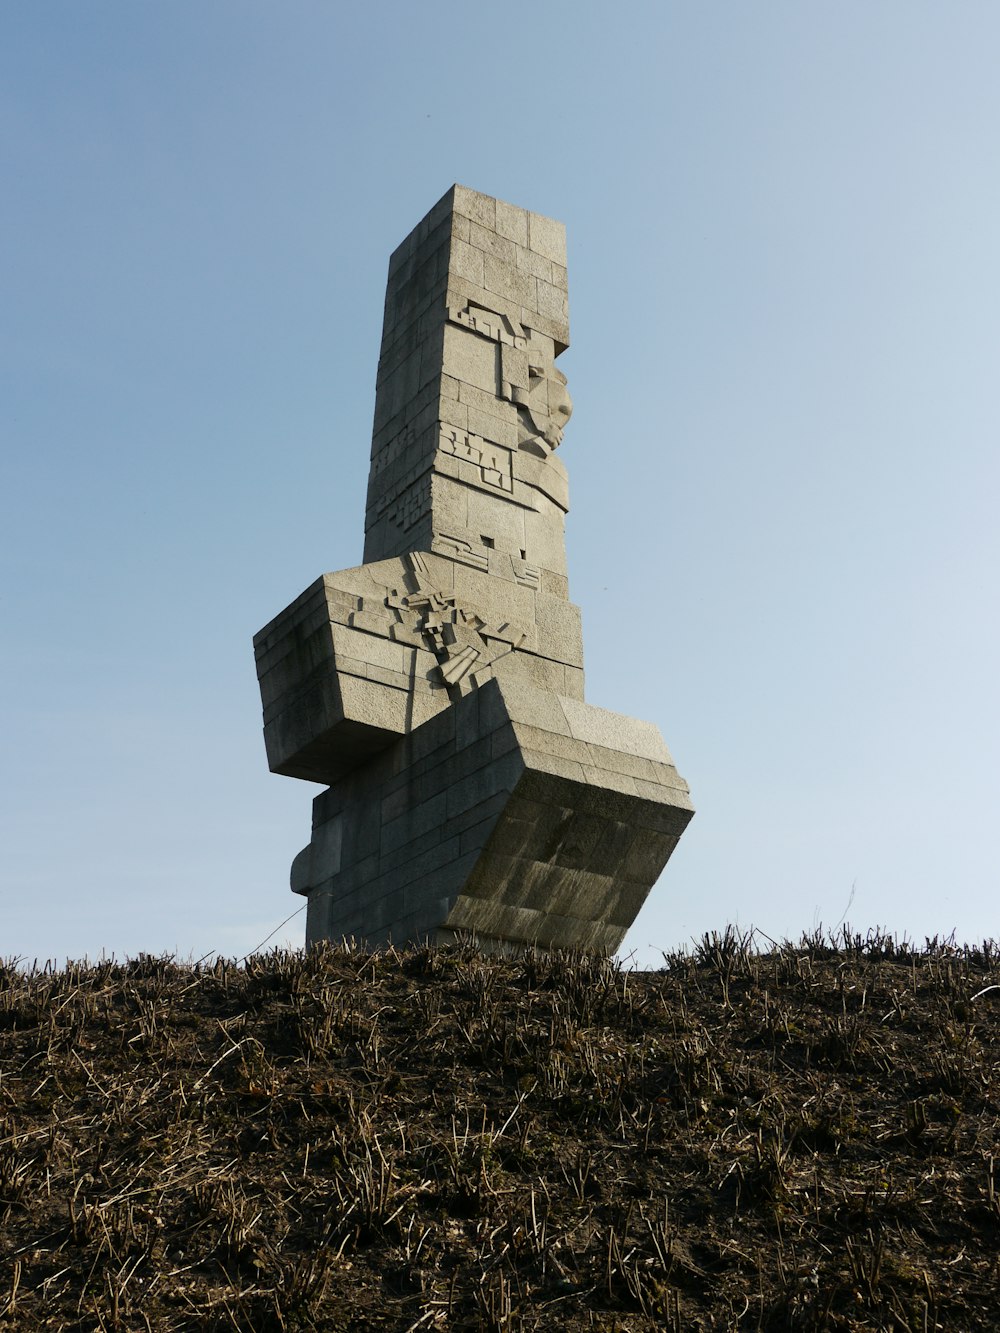 a sculpture made of blocks on top of a hill